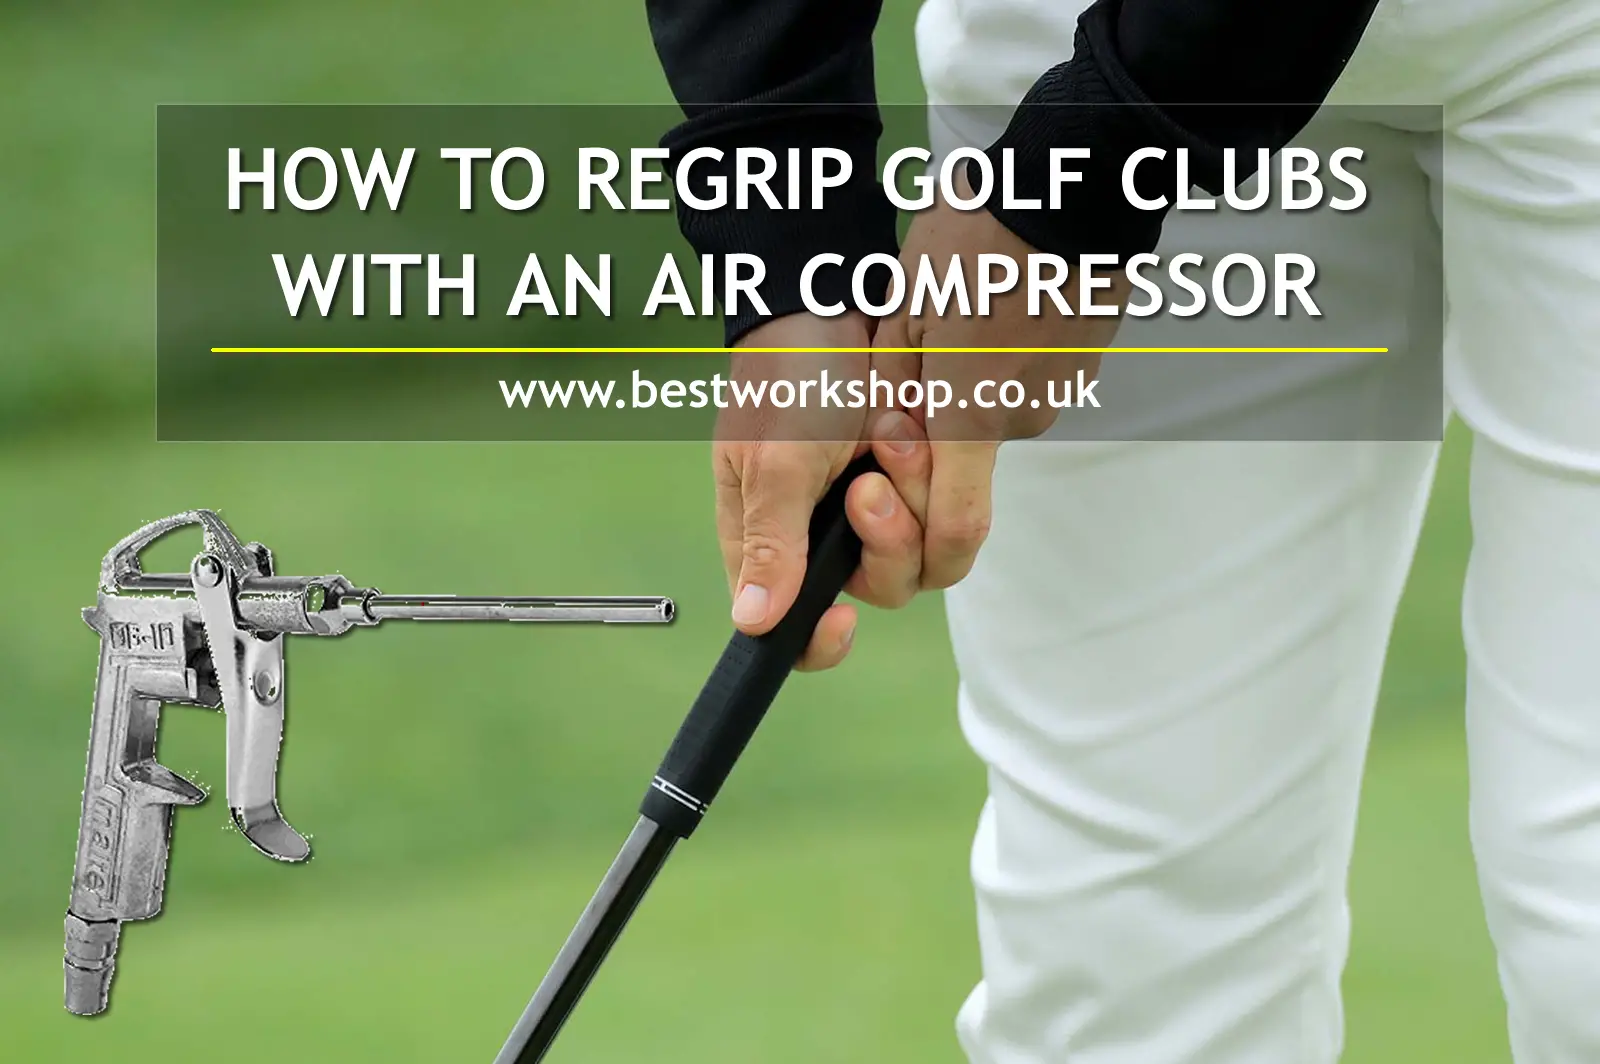 How To Regrip Golf Clubs With An Air Compressor